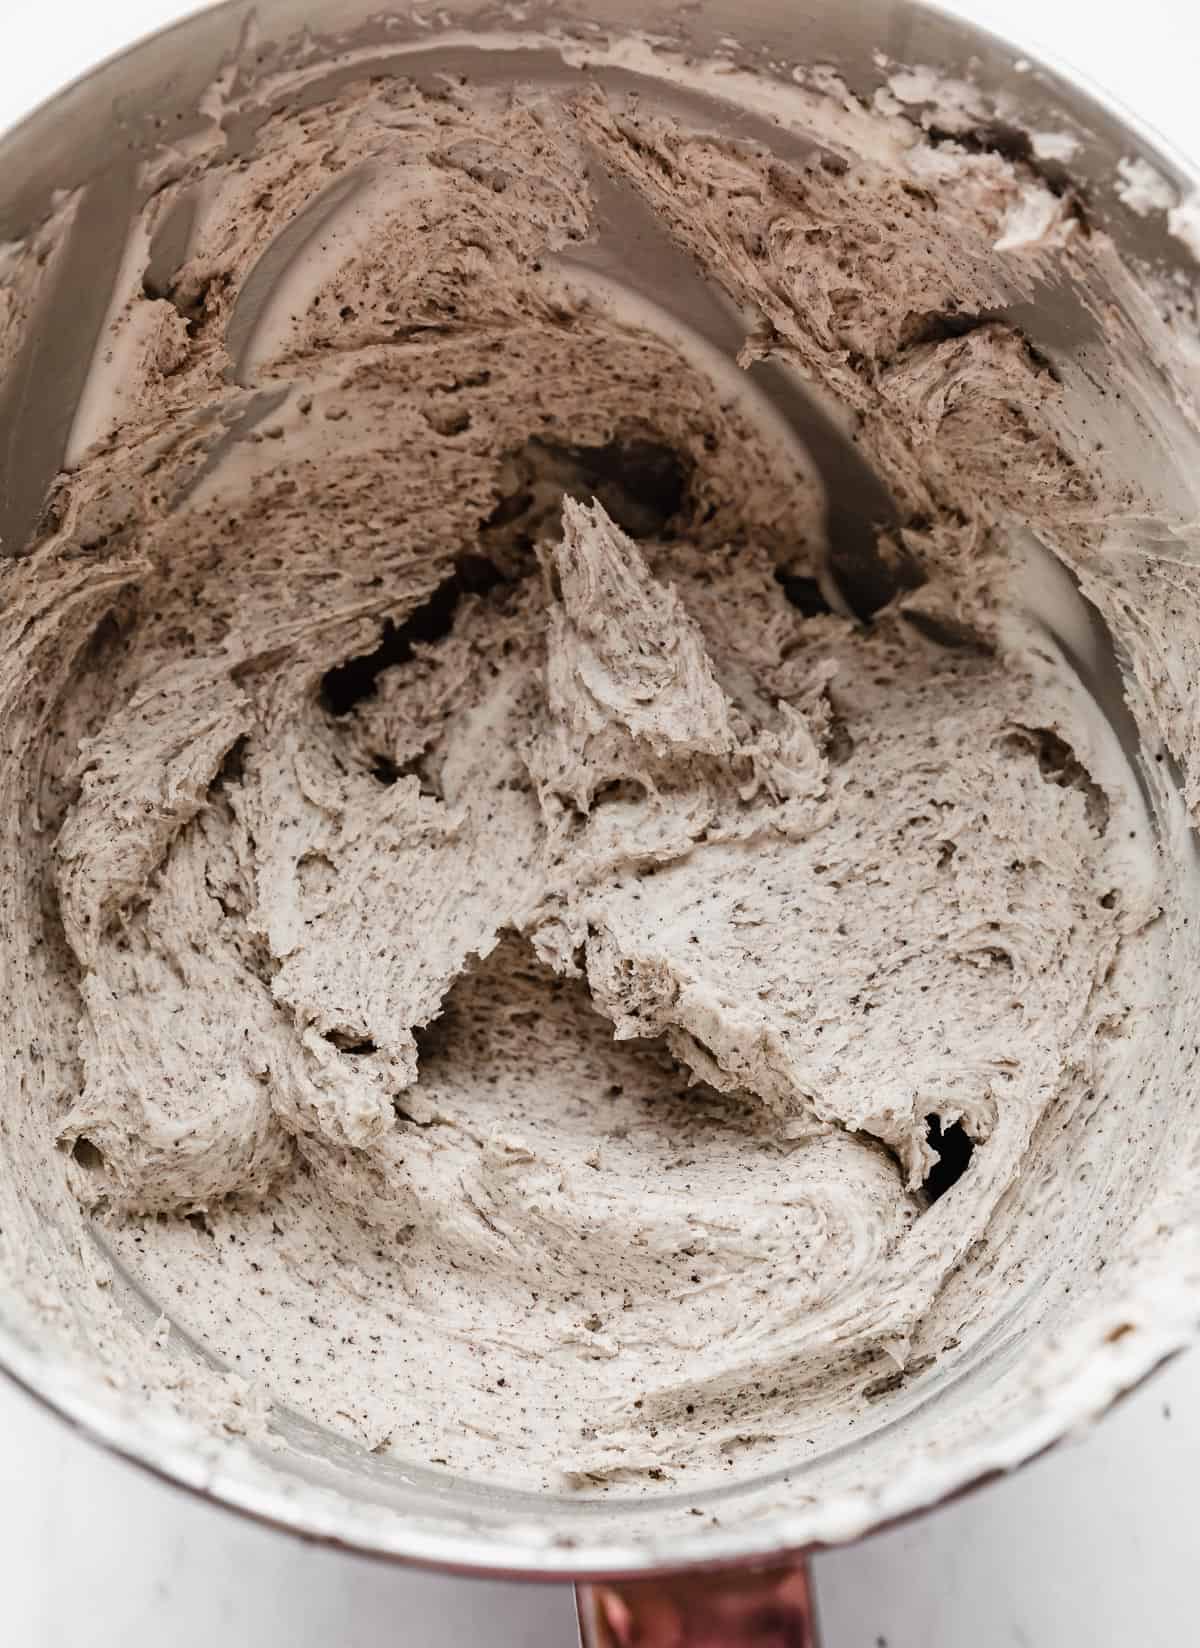 A cookies and cream buttercream in a metal mixing bowl.